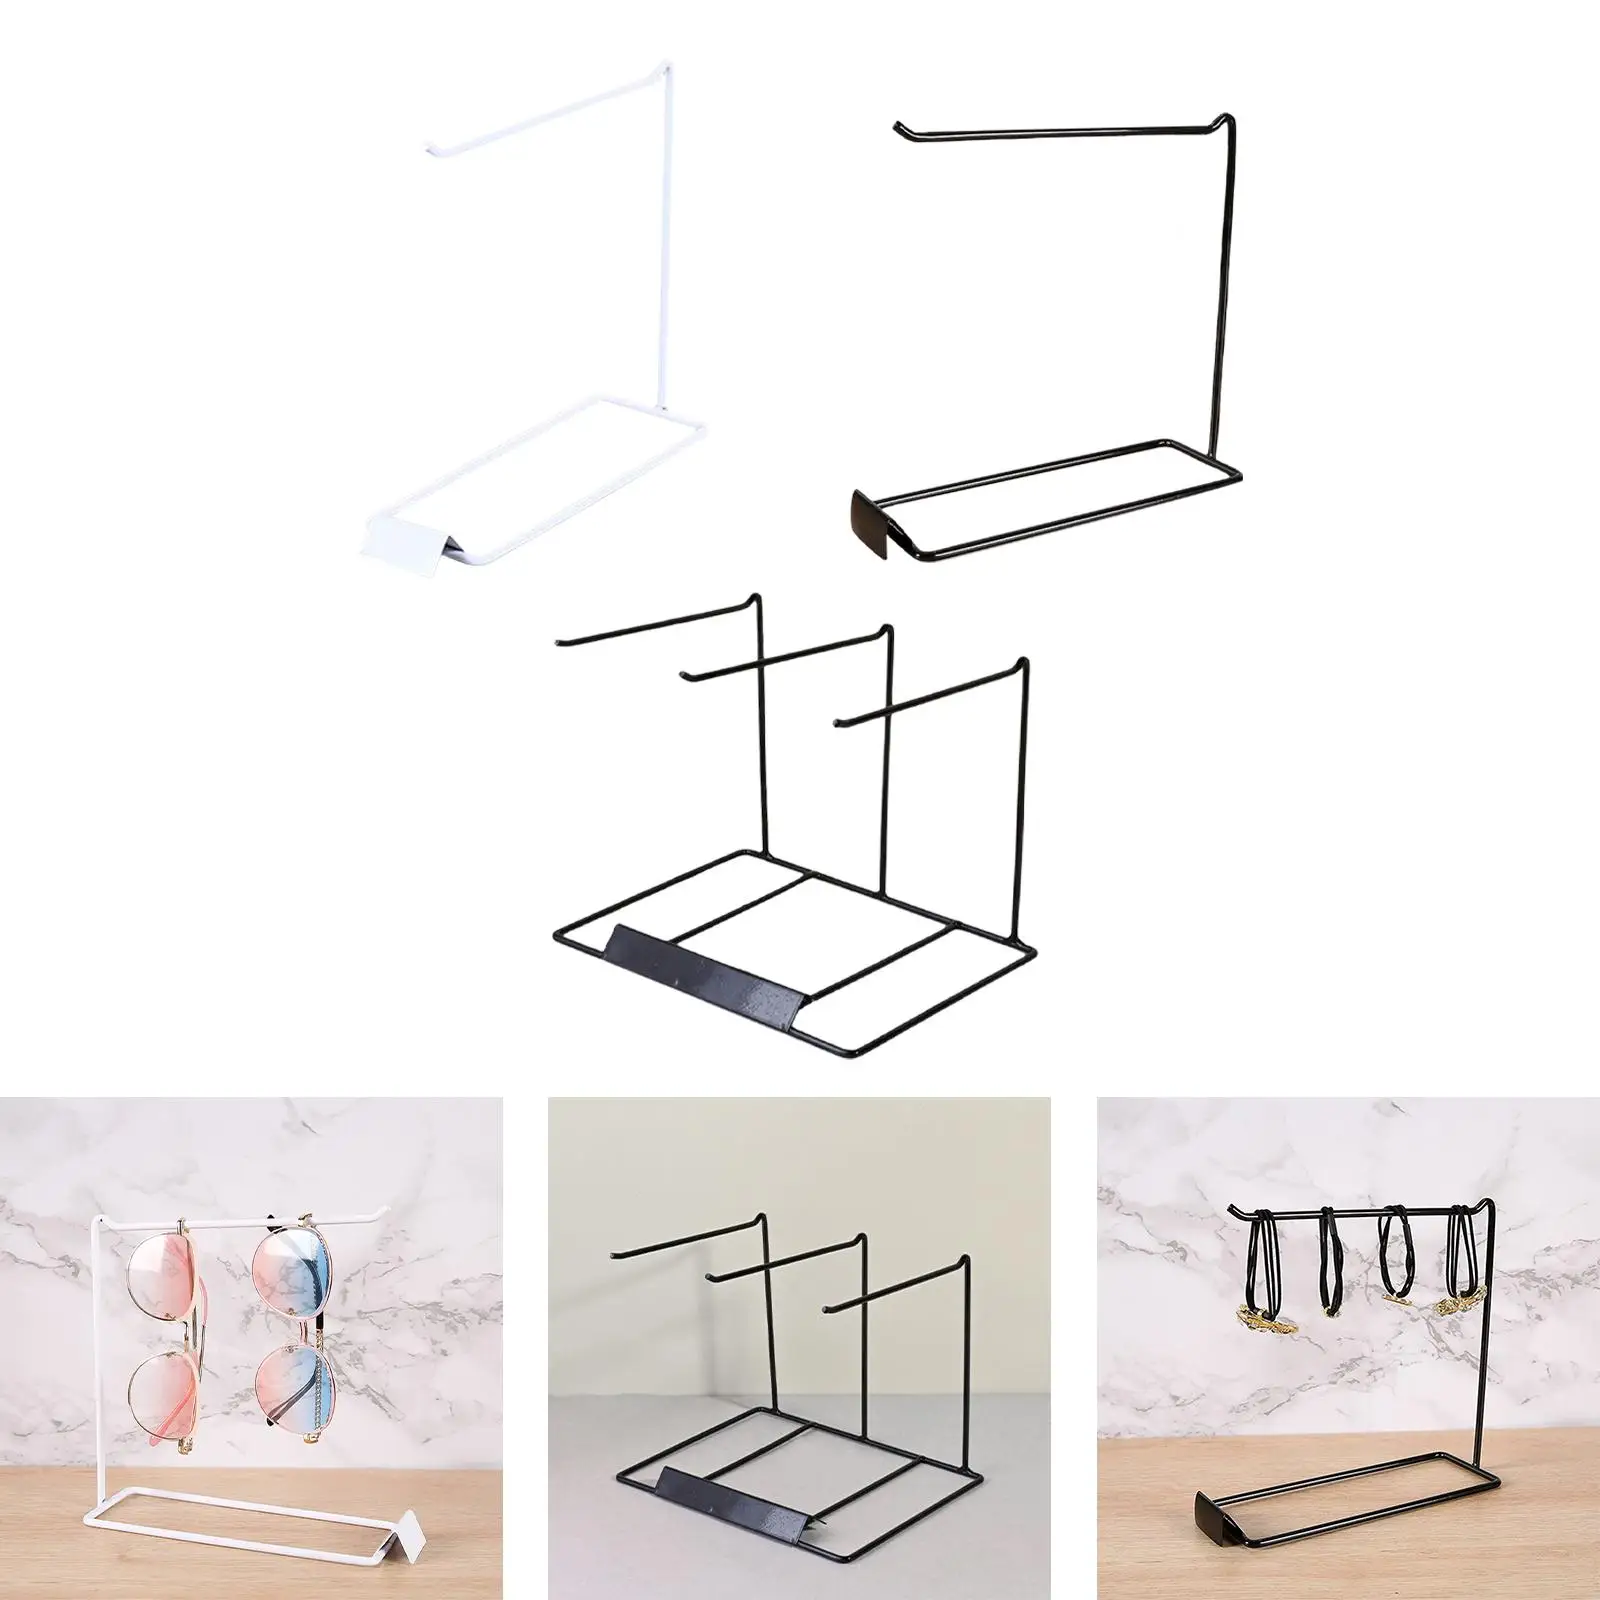 Countertop Jewelry Organizer Stand Free Standing Iron Hanging Display Holder Rack for Pendant Glasses Home Decor